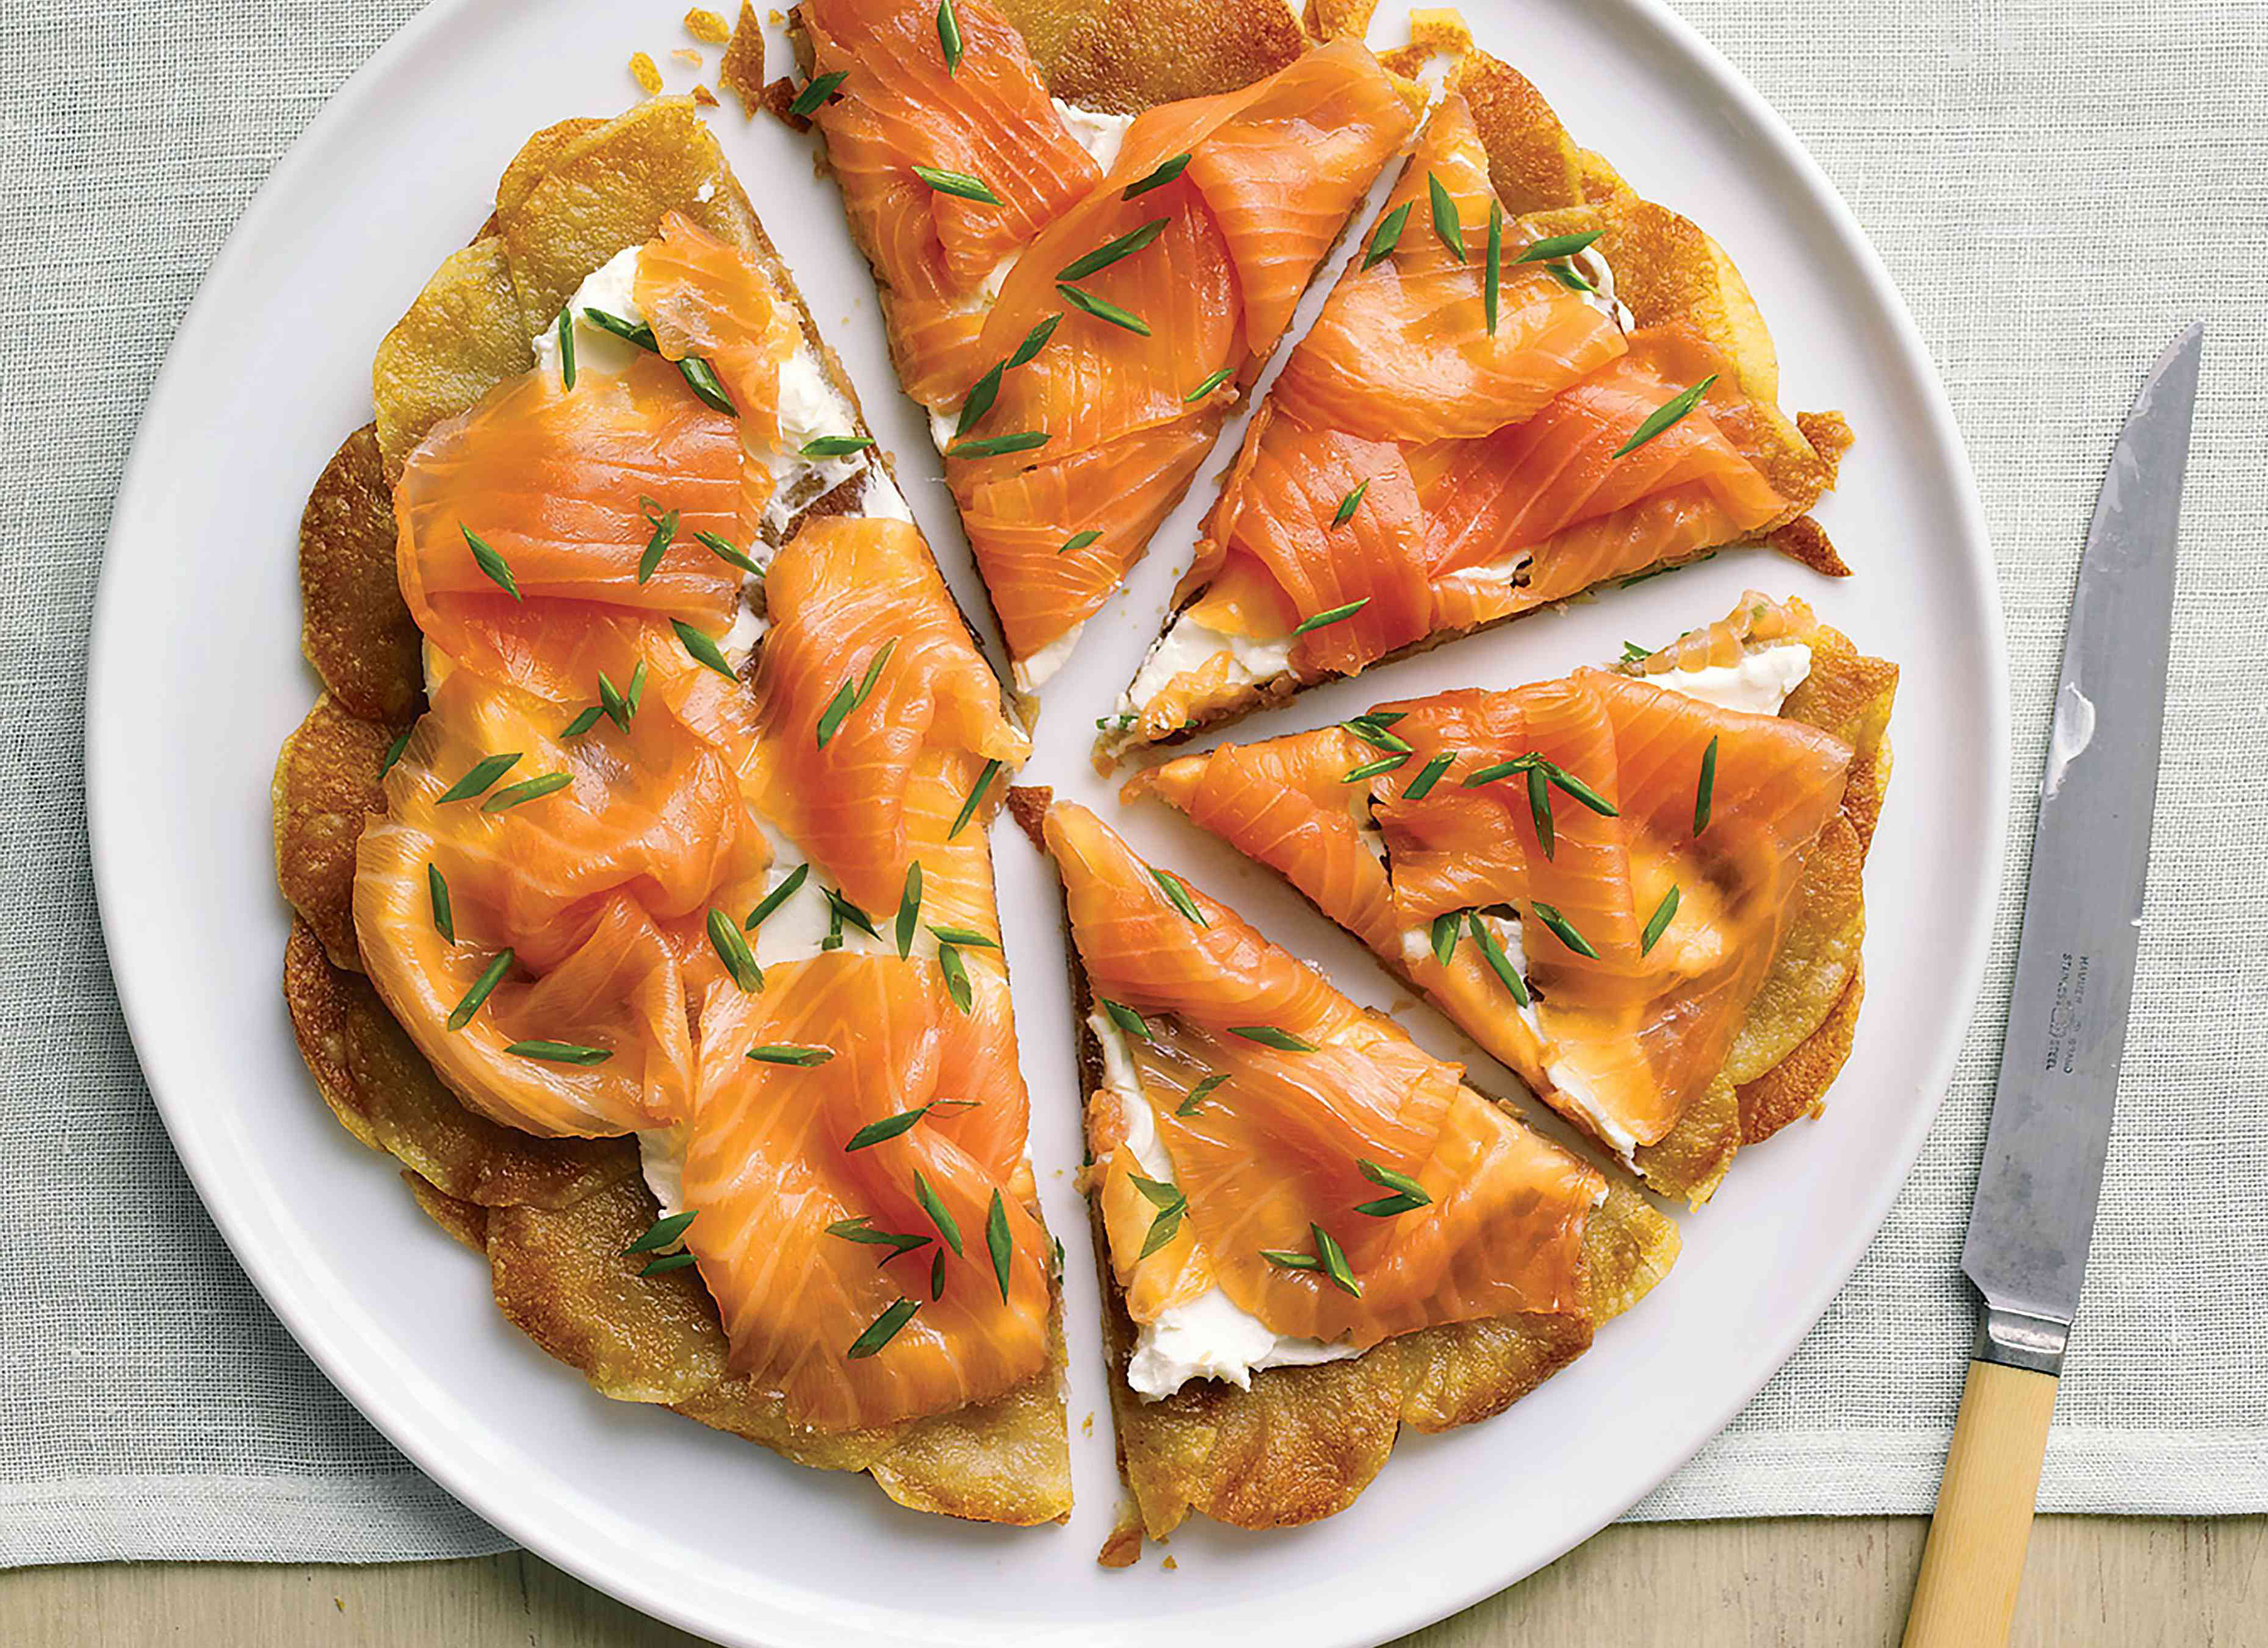 15 Smoked Salmon Appetizers That Will Make the Party